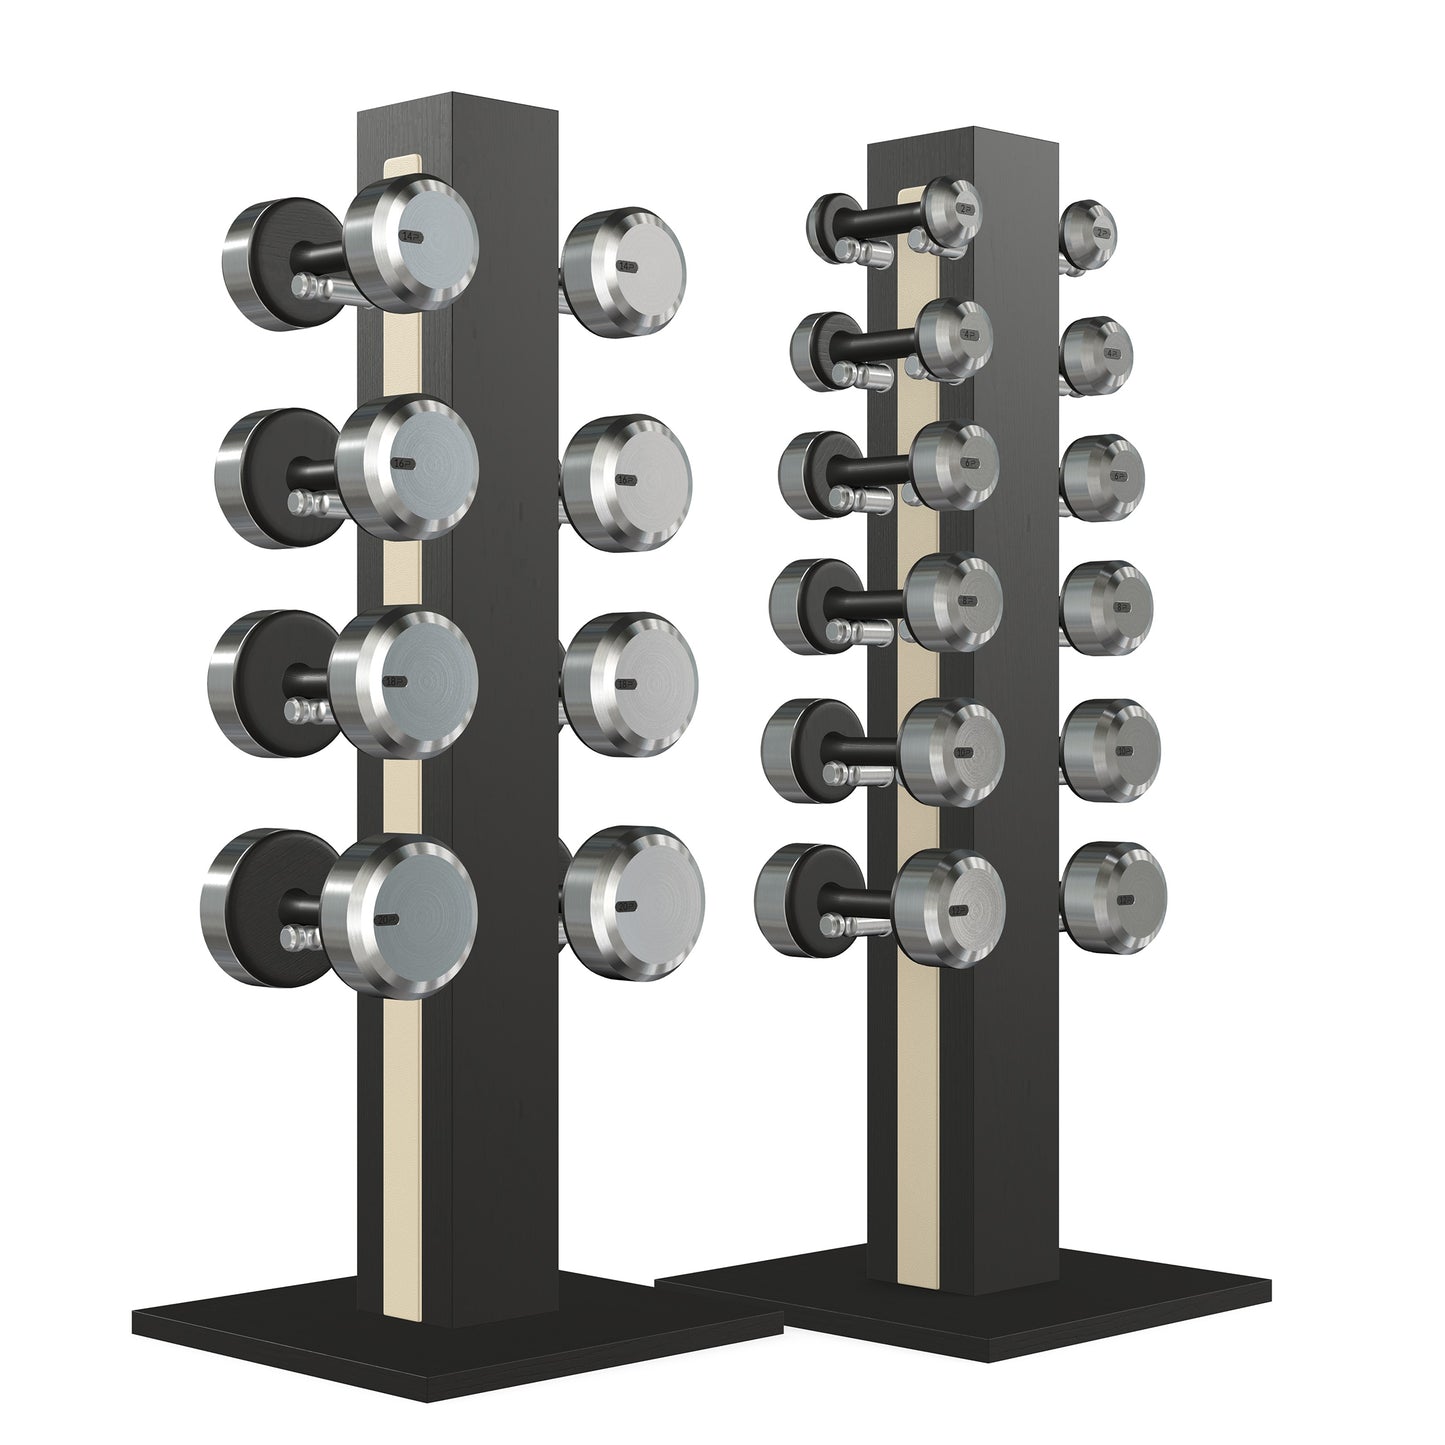 PENT. COLMIA Set - Dumbbells on a Vertical Wooden Stand